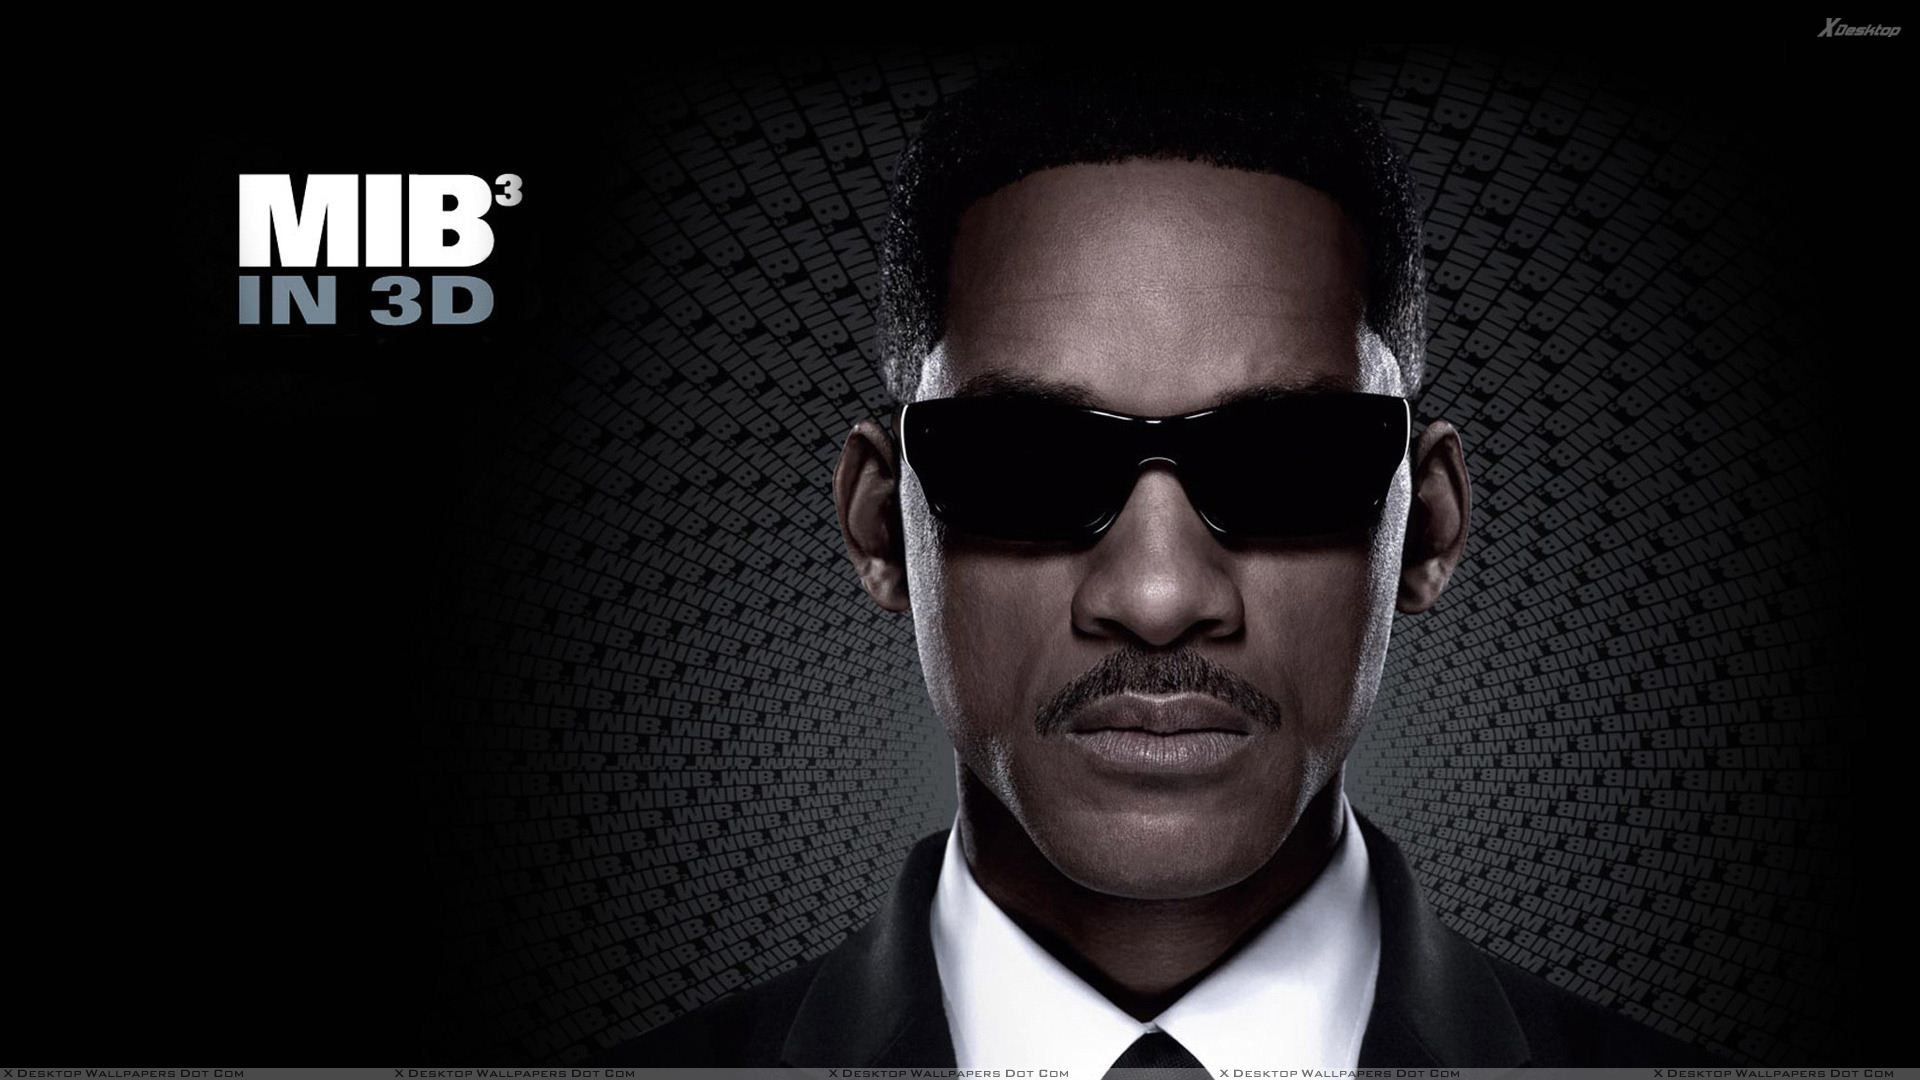 1920x1080 You are viewing wallpaper titled "Men in Black ...